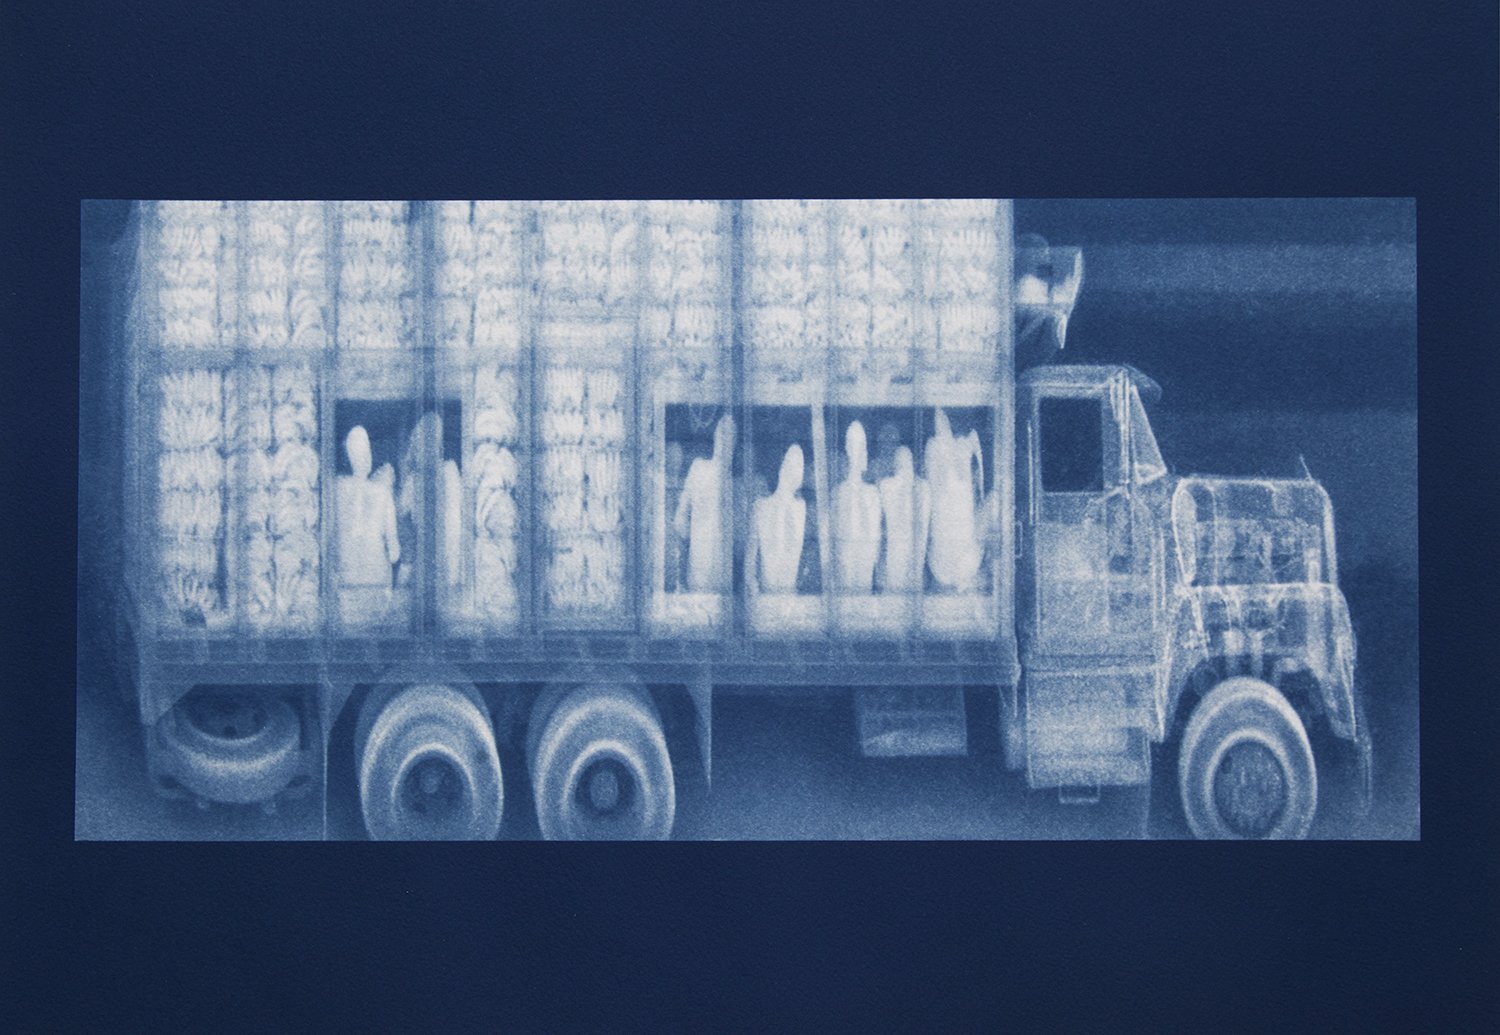 Nolle Mason's Series on Illegal Immigration Makes Digital X-Rays Analog